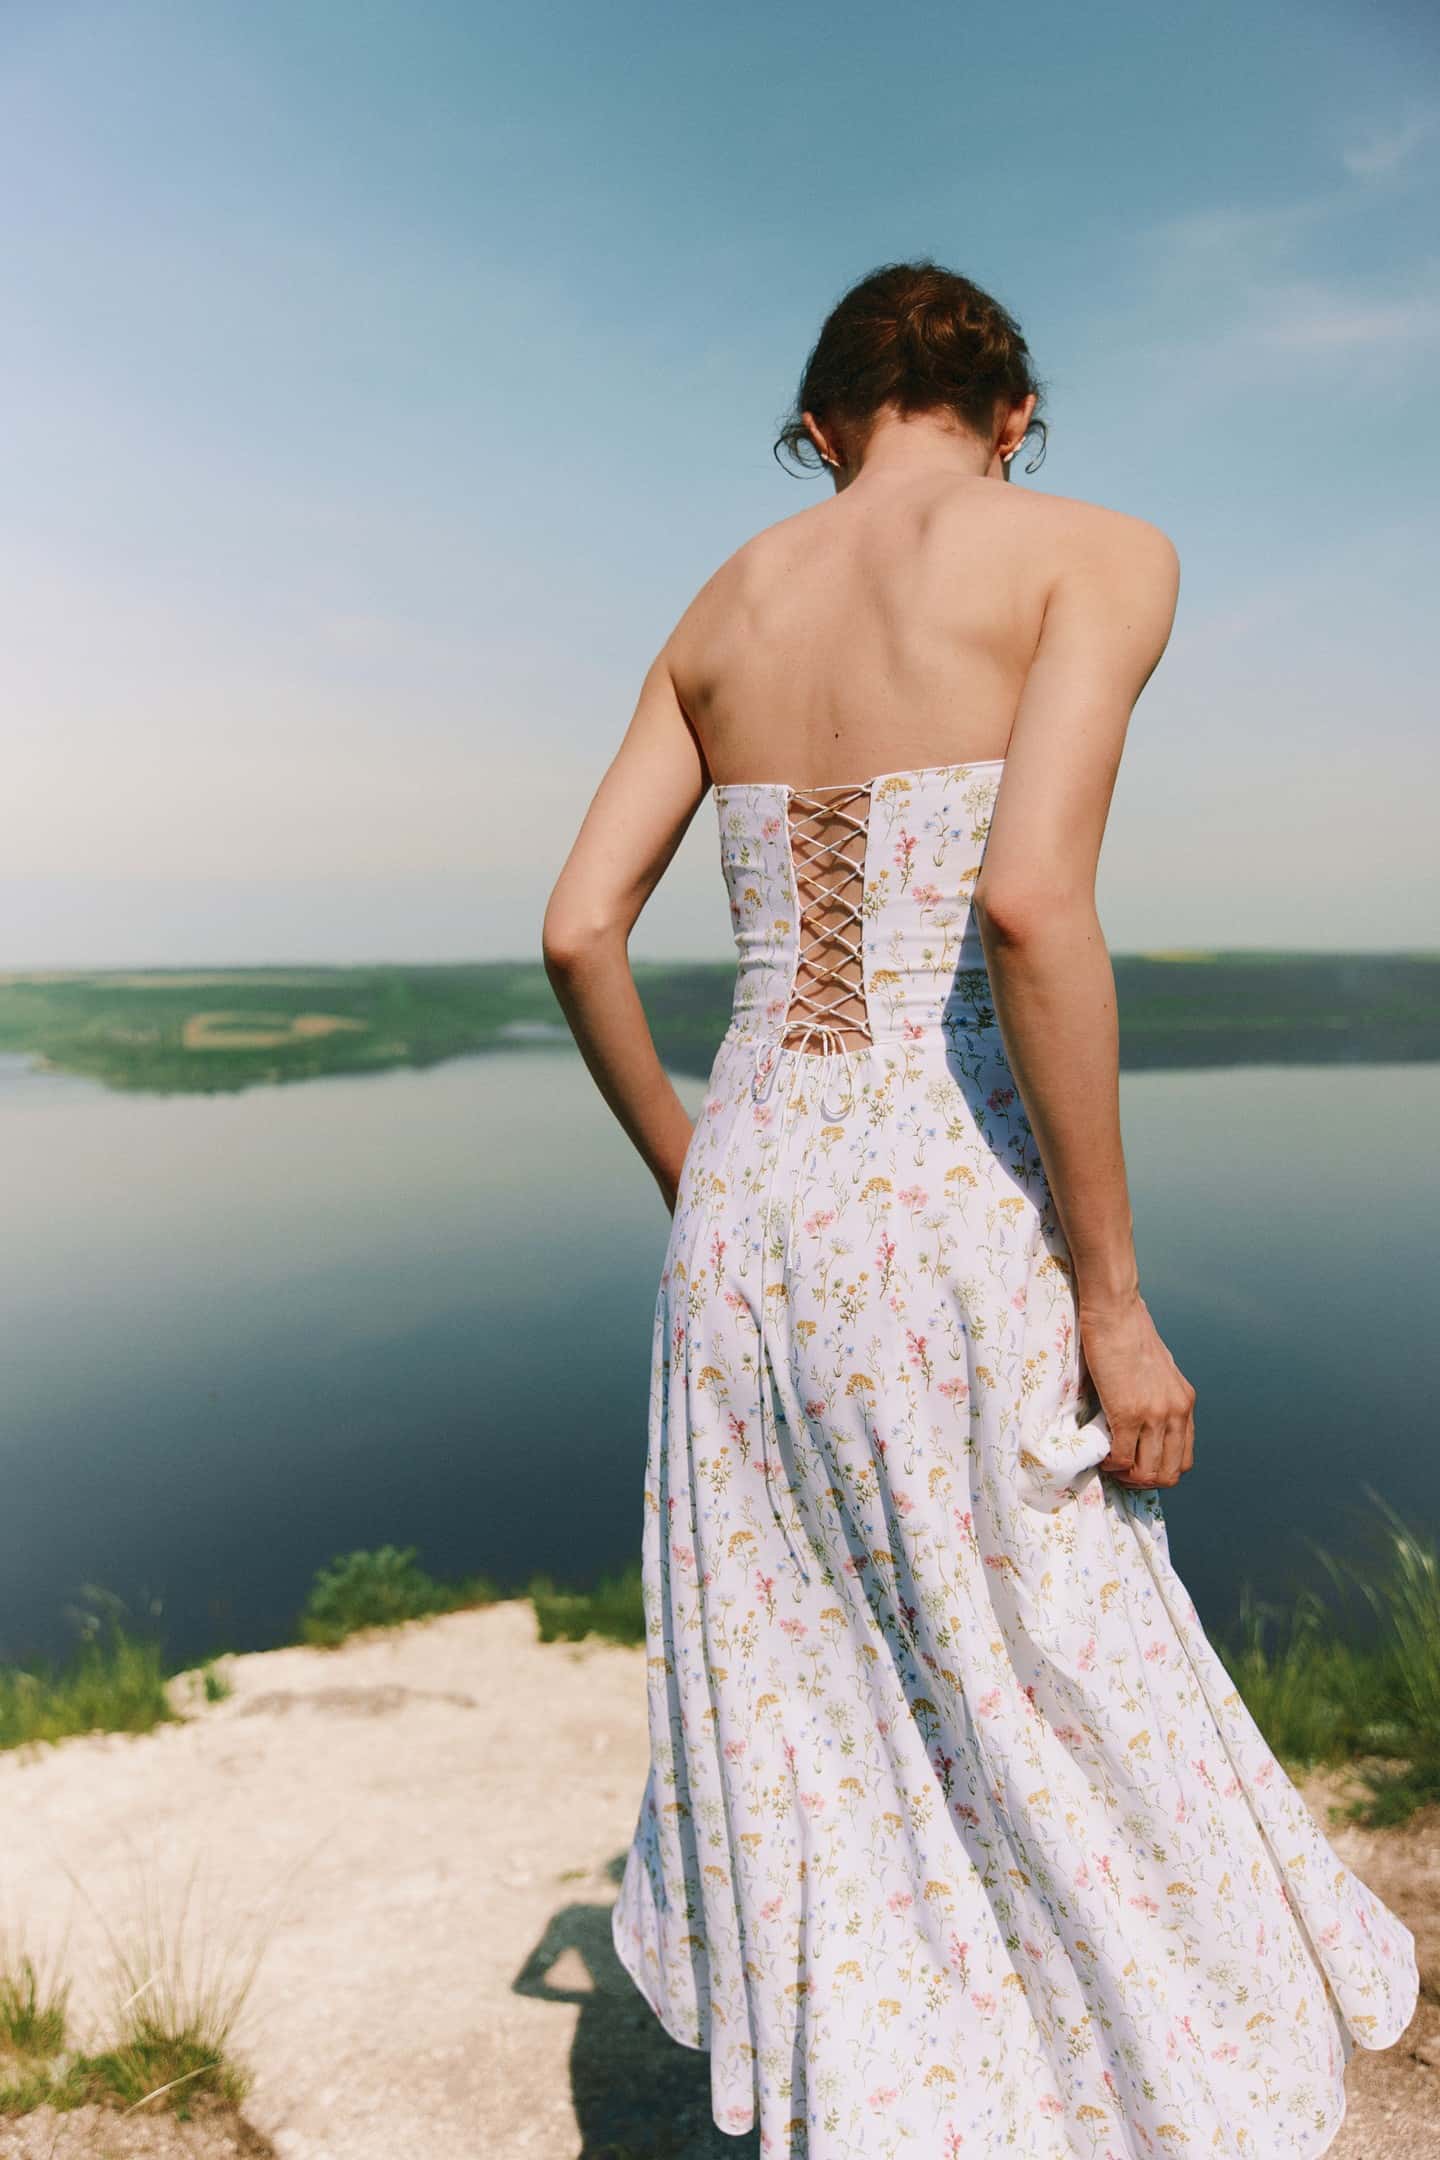 Endless Valley Dress image featured